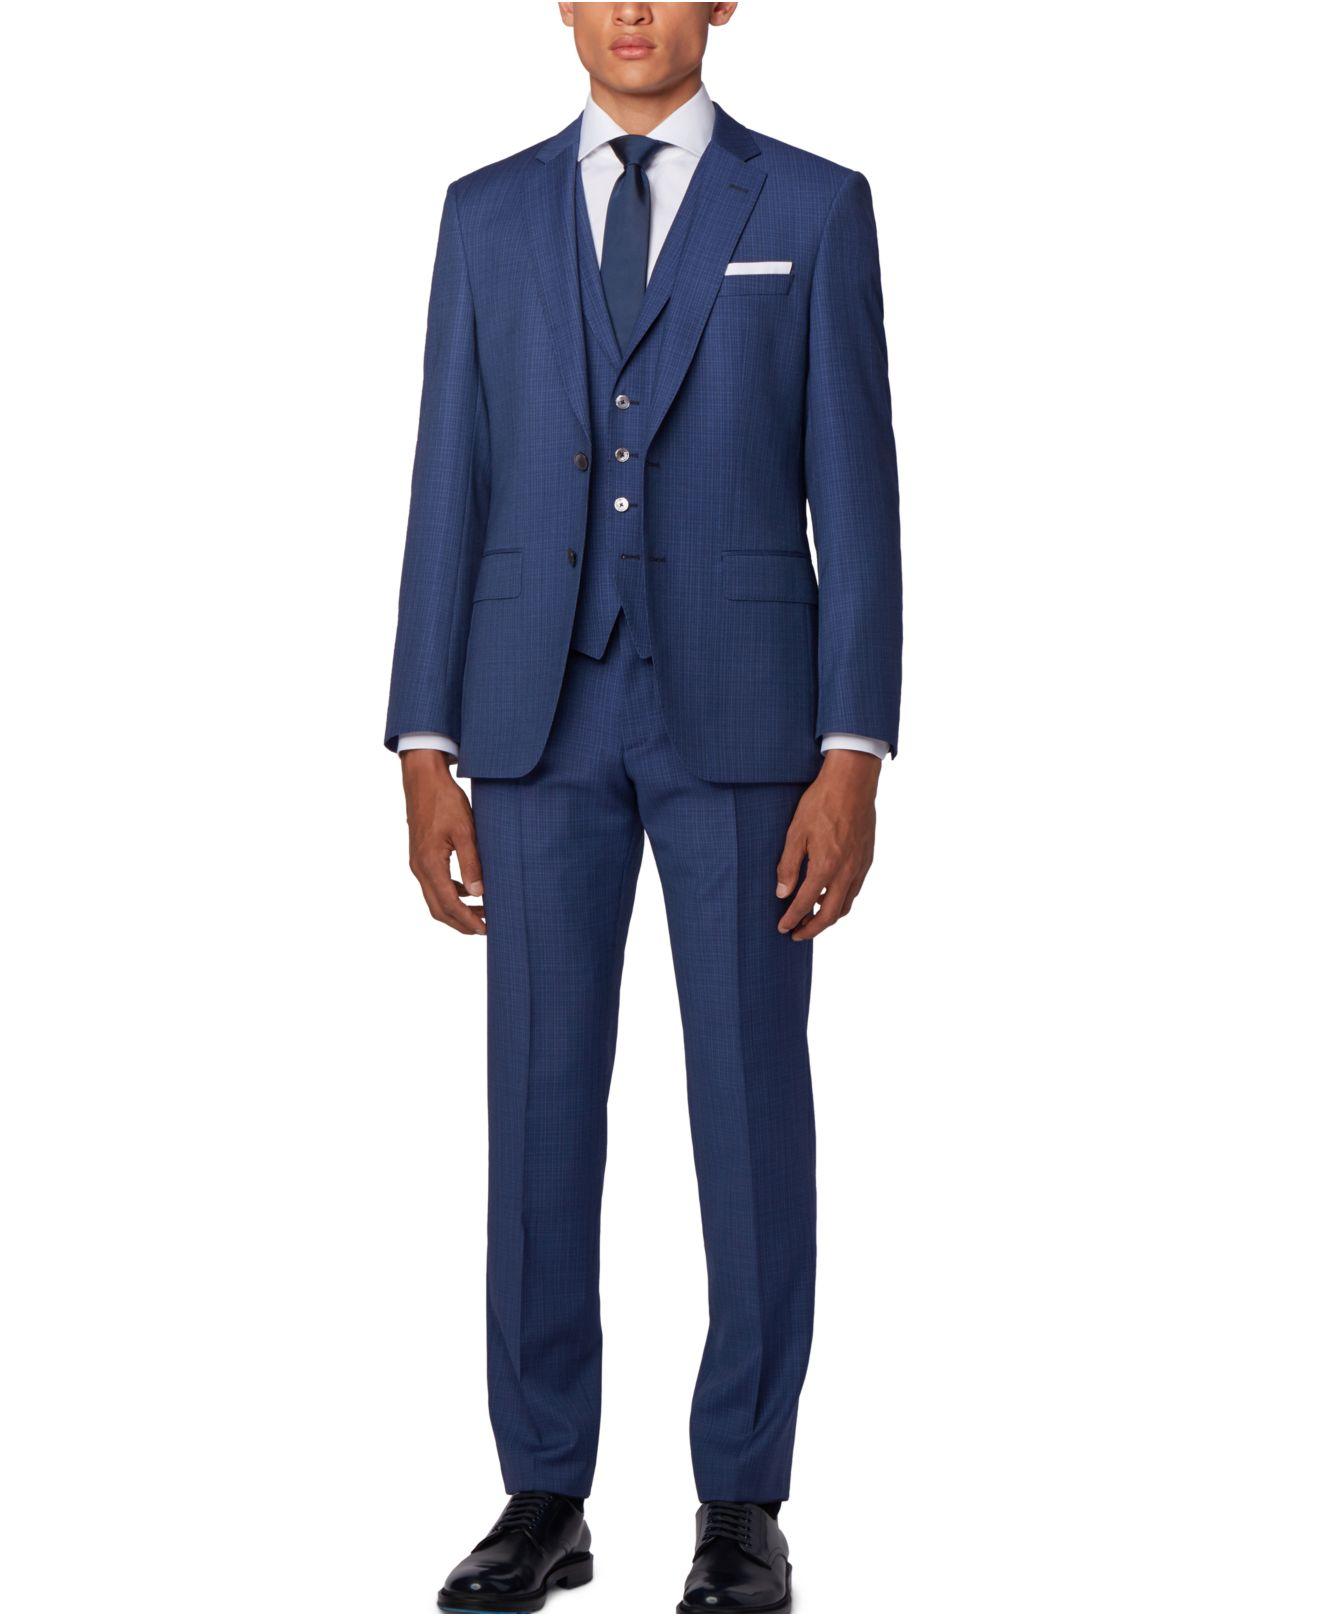 BOSS by HUGO BOSS Synthetic Hutson5/gander3 Solid 3 - Piece Suit in Blue  for Men - Save 60% - Lyst